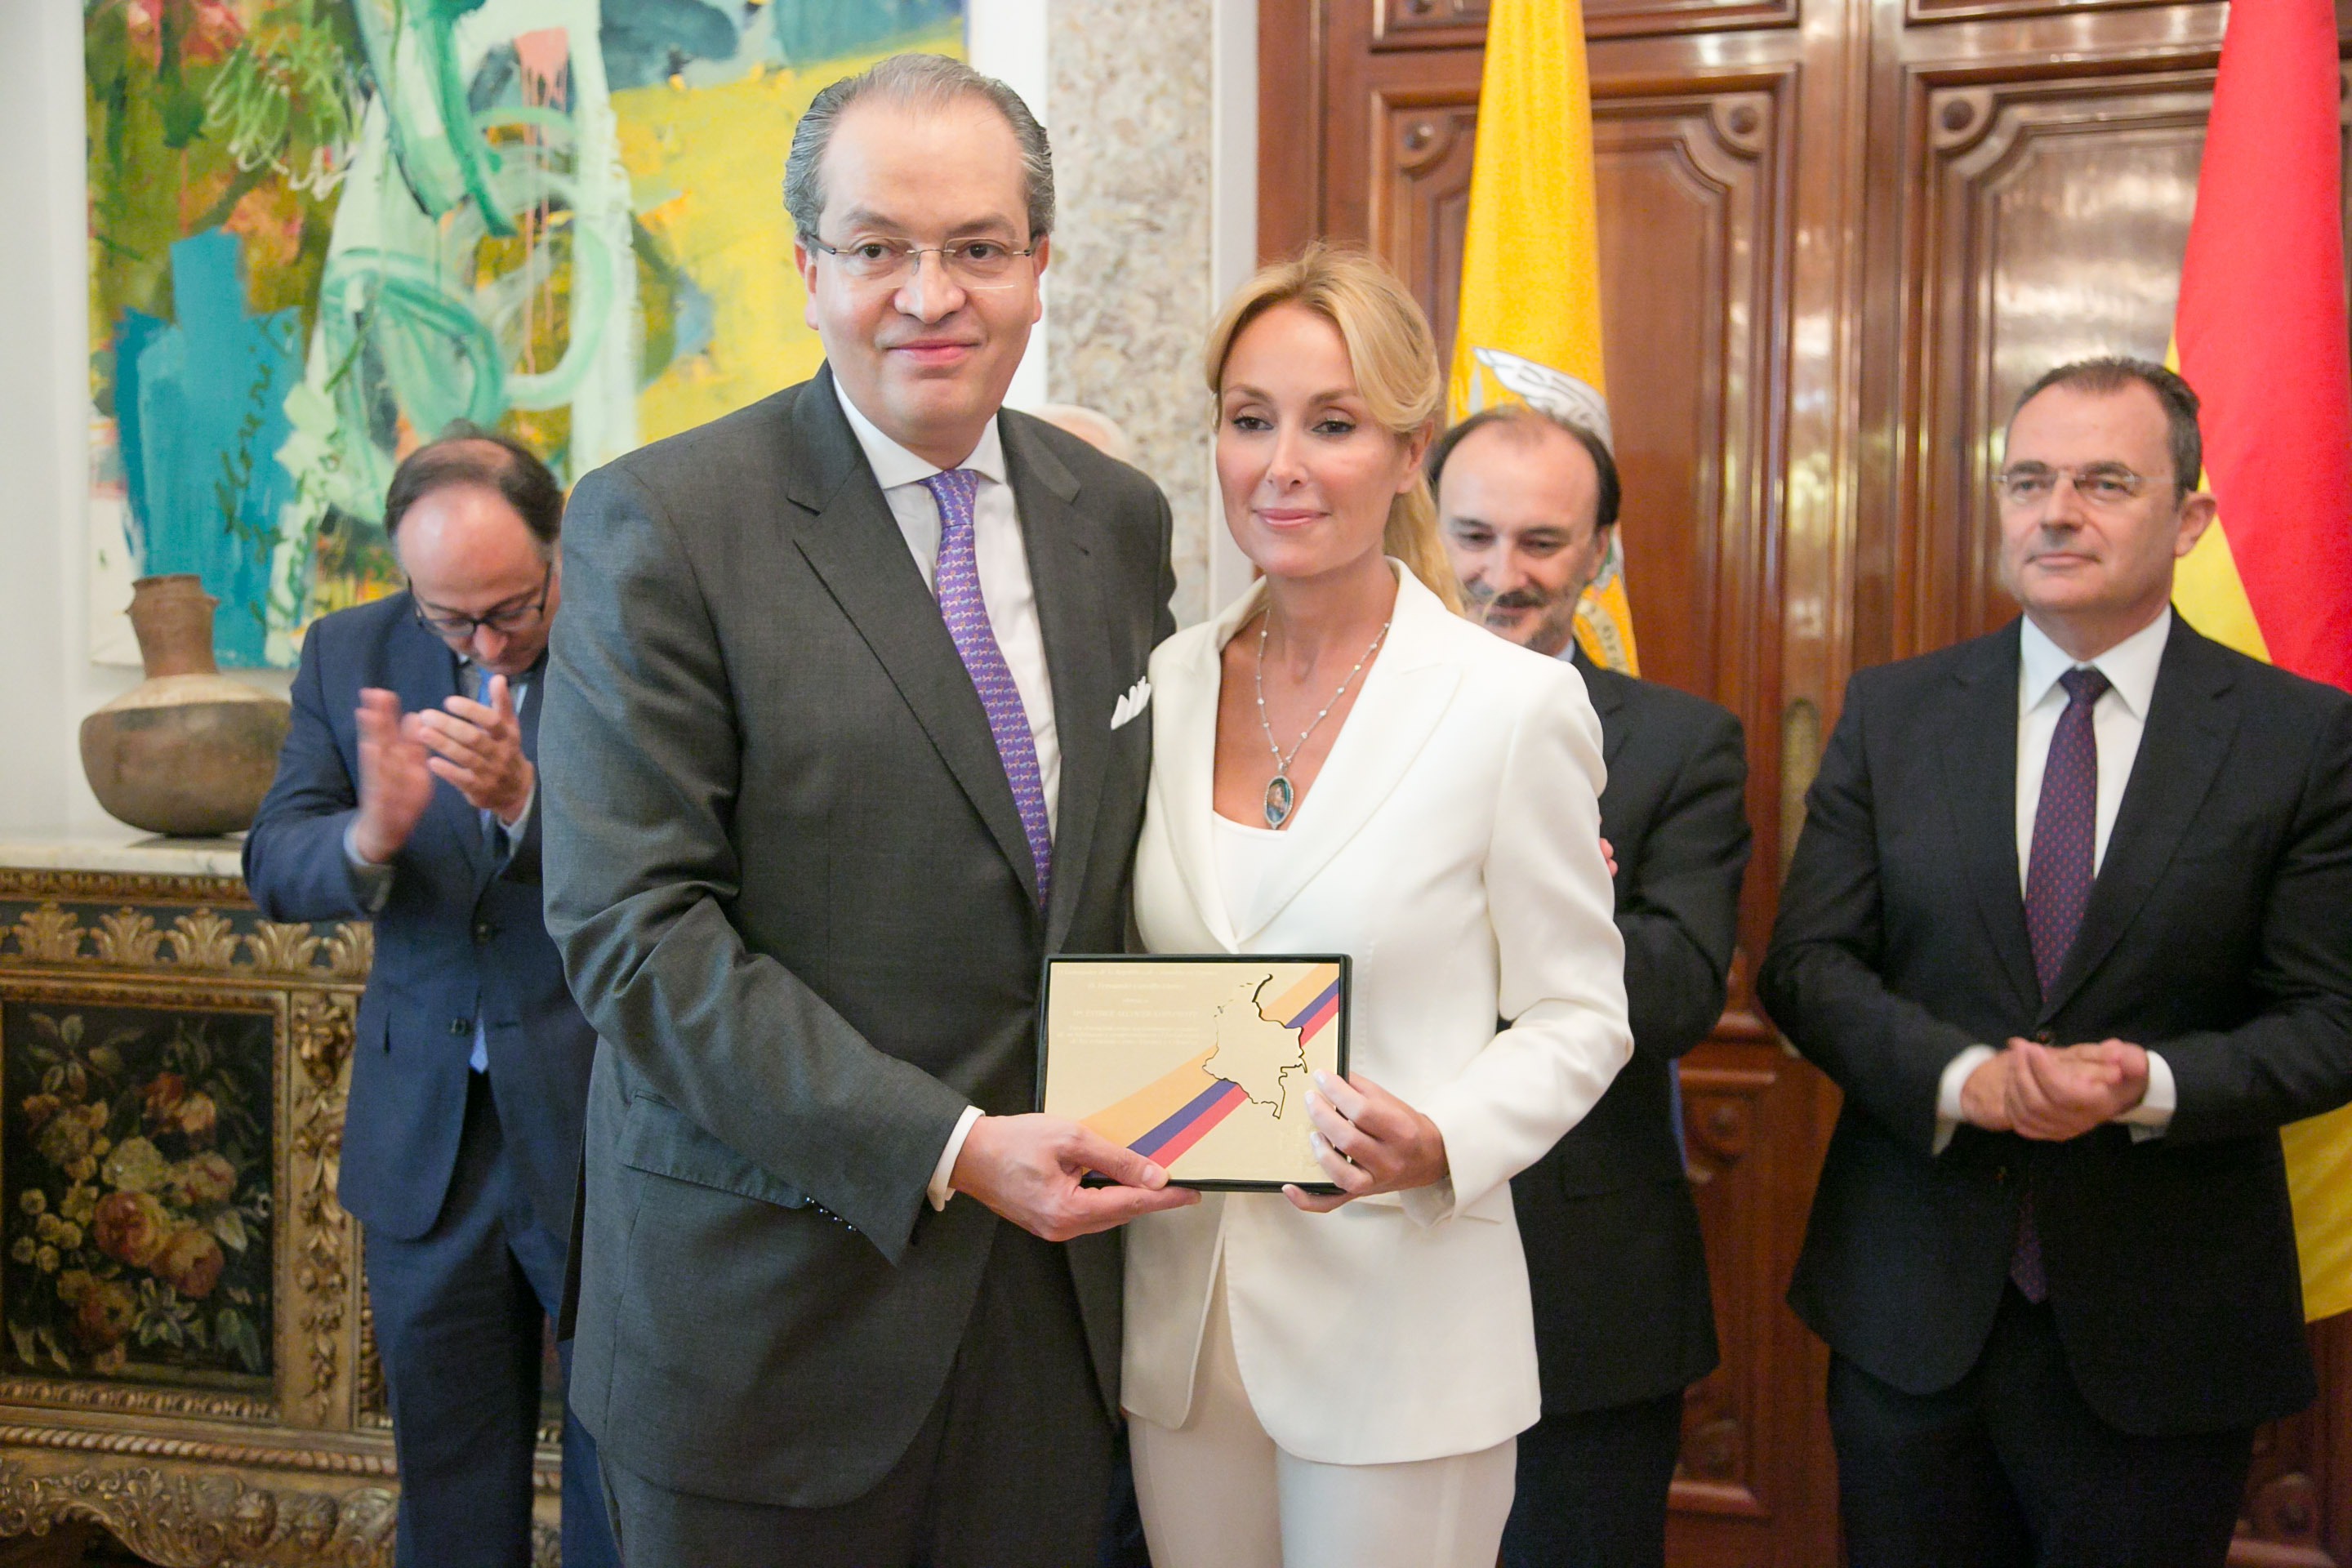 Colombia awards Esther Alcocer Koplowitz for her contribution to strengthening relations with Spain